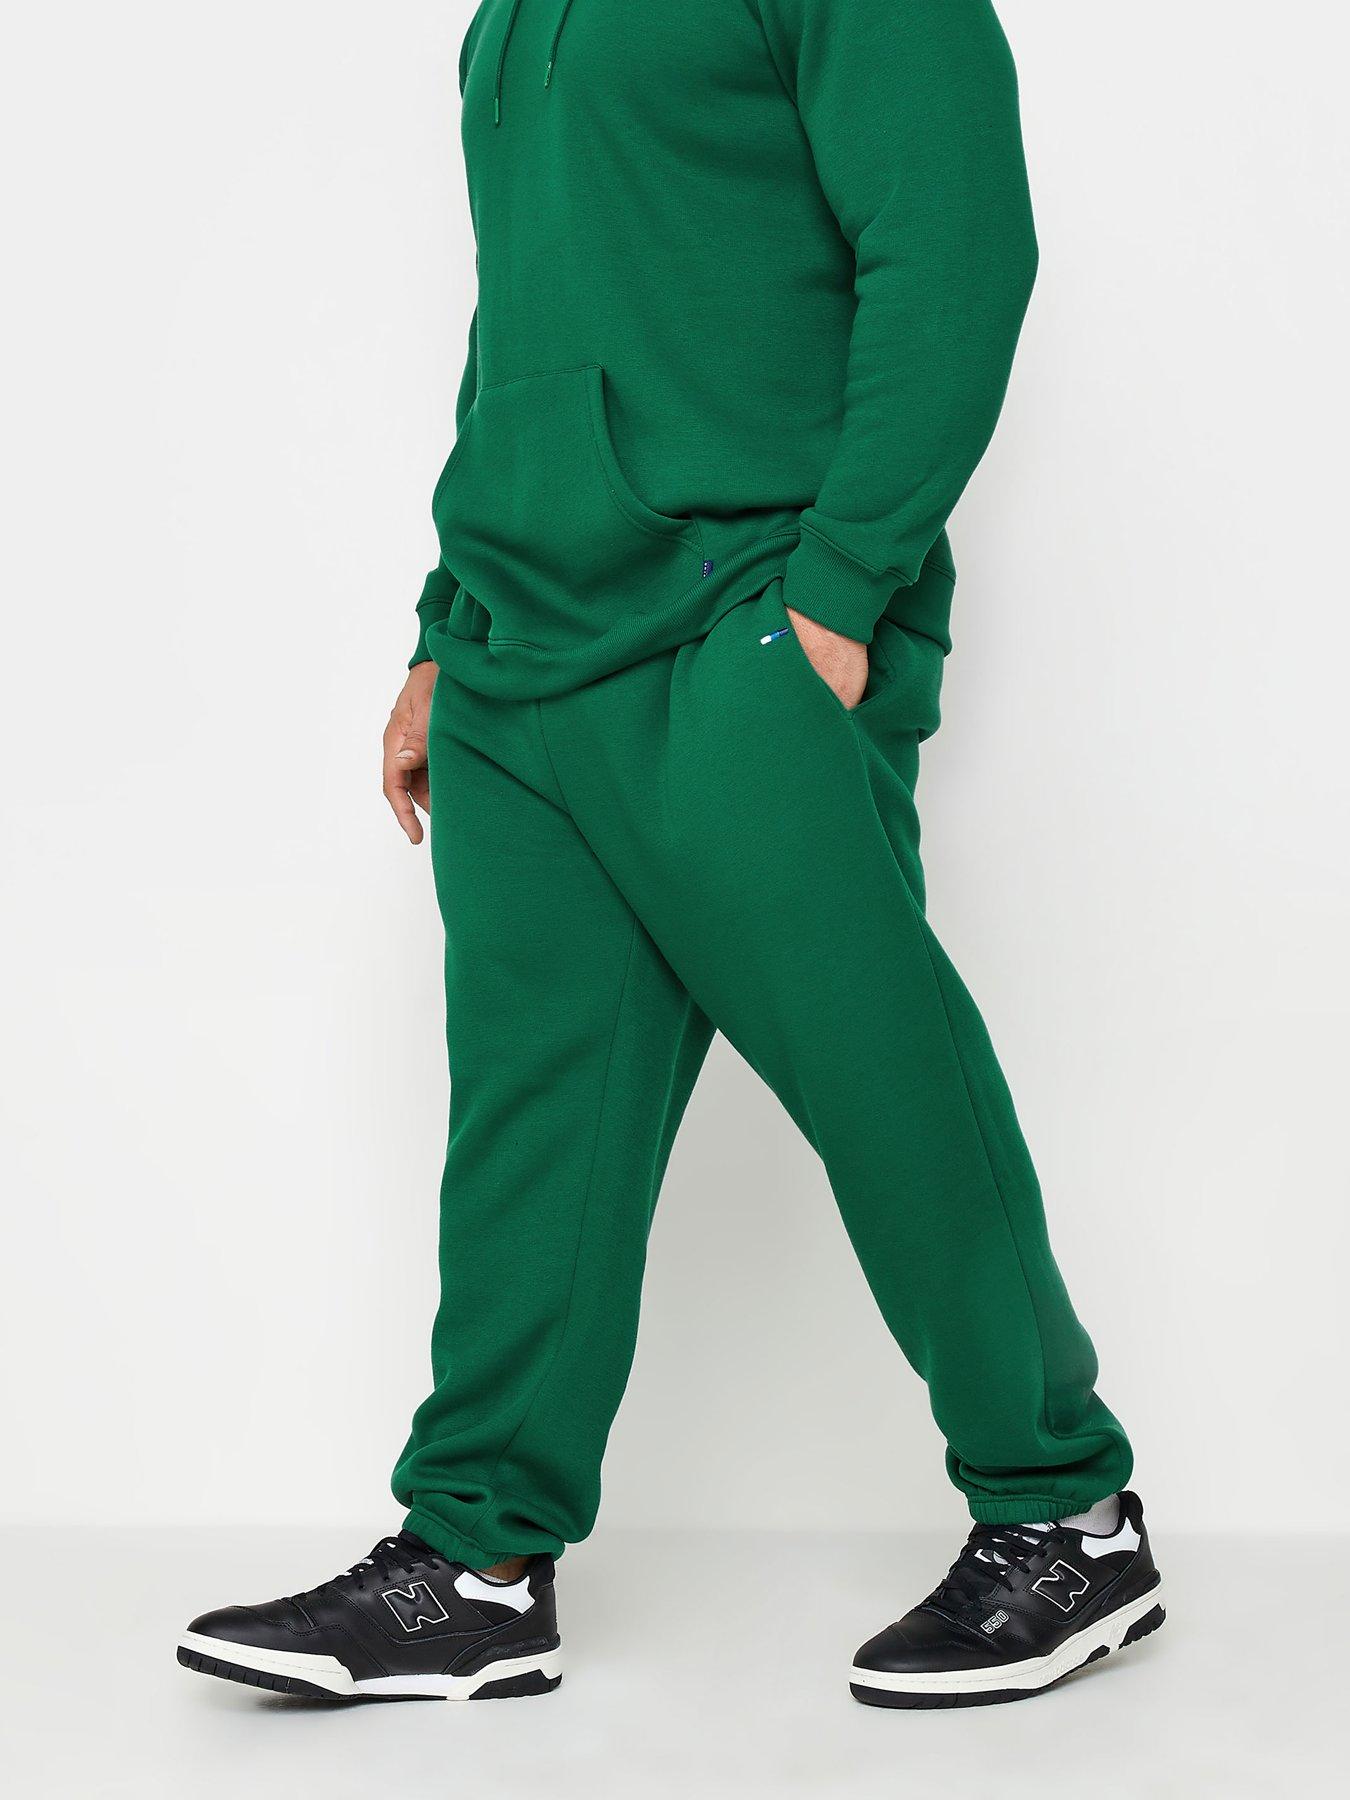 Mens Unisex Fleece Lined Sweat Track Pants Suit Casual Trackies Slim Cuff XS-6XL